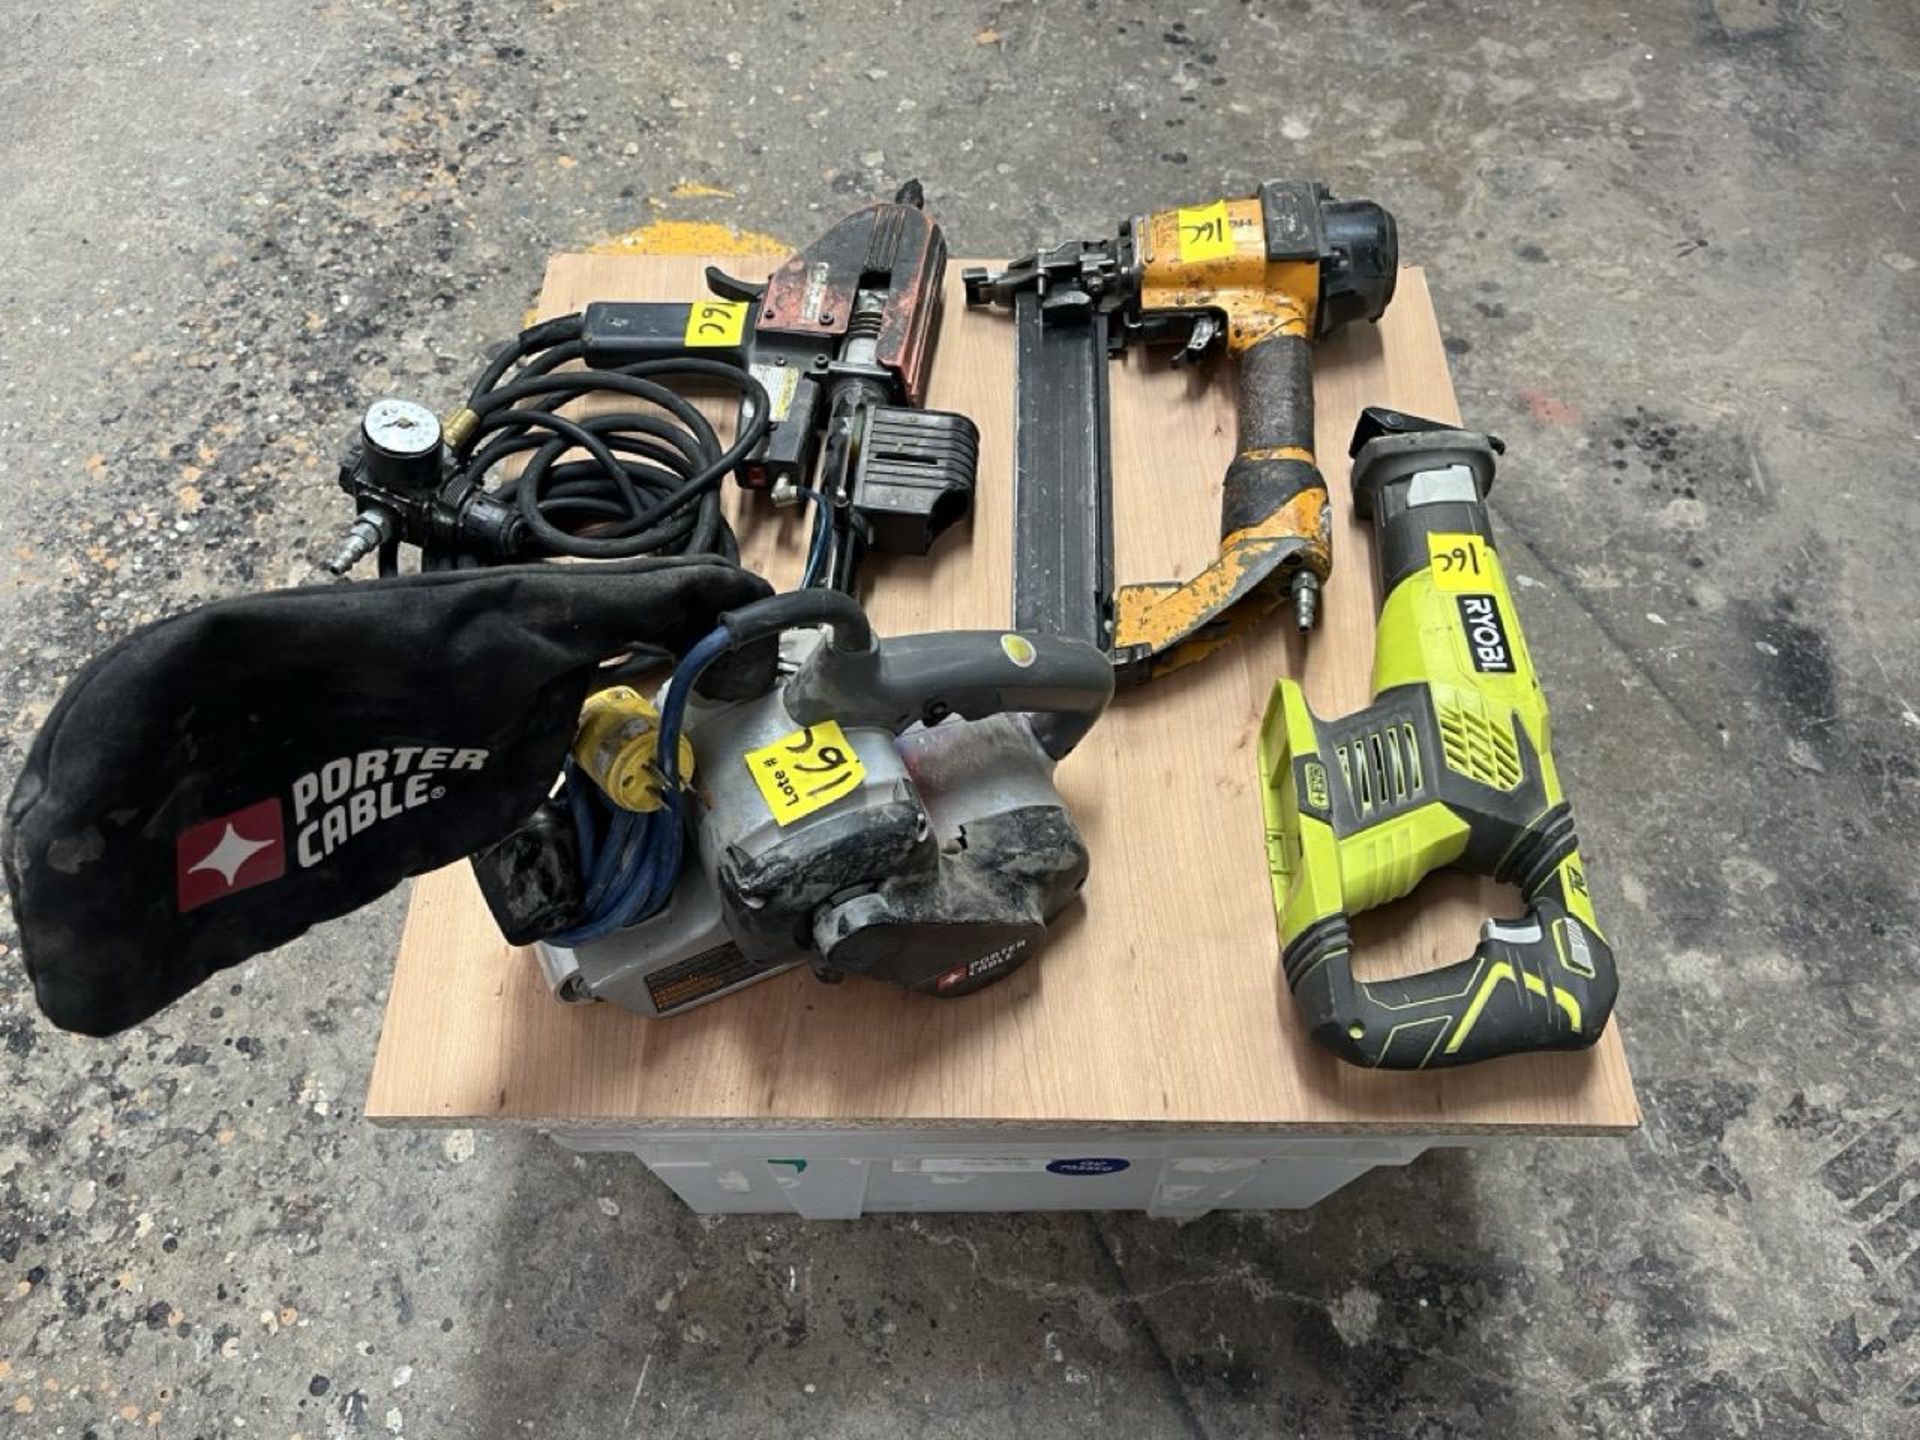 Lot of 4 pieces contains: 1 Porter electric sander with dust collector; 1 Ryobi wood saw without ba - Image 3 of 14